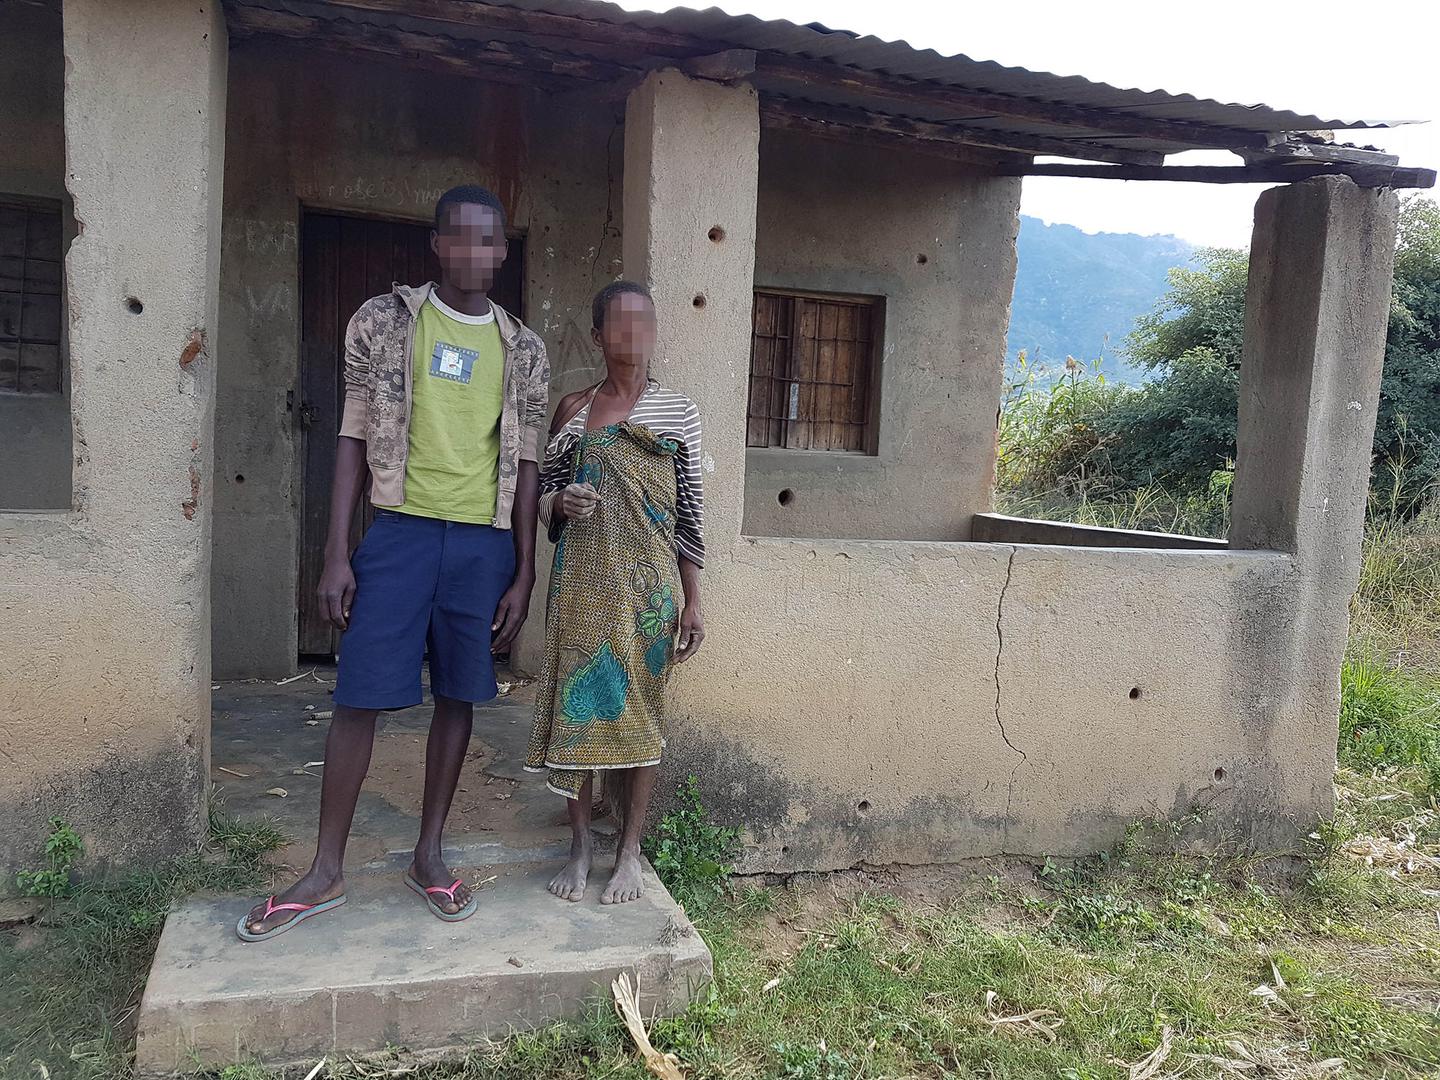 A woman and her son in front of their house with bullet holes in Mukodza village, Gorongosa. They said soldiers arrived in army vehicles and fired without warning at the house in June 2016, forcing them to flee through a window. 